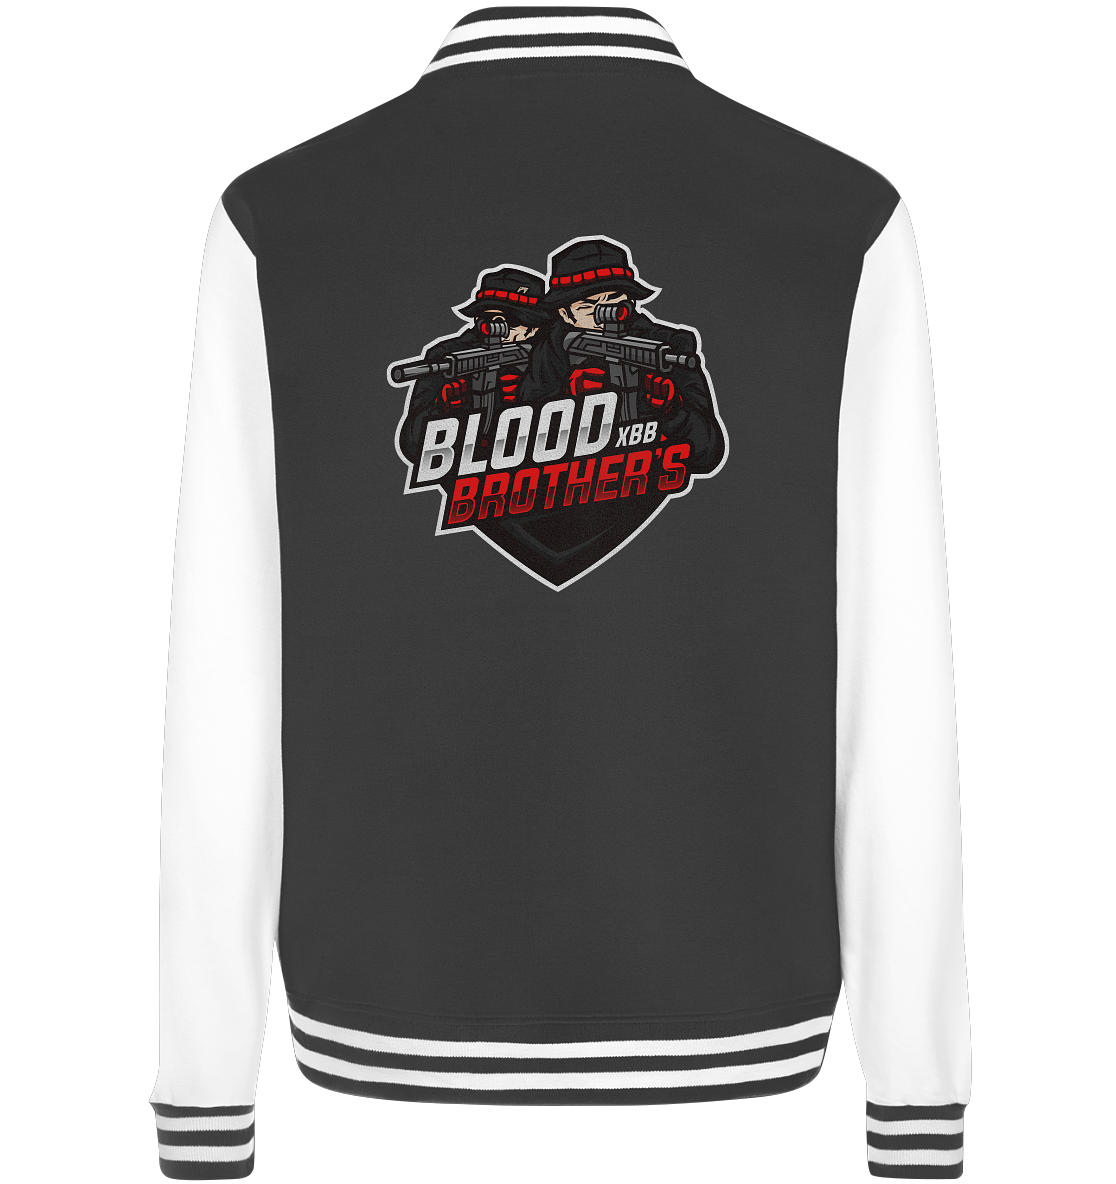 BLOODBROTHER'S - Basic College Jacke